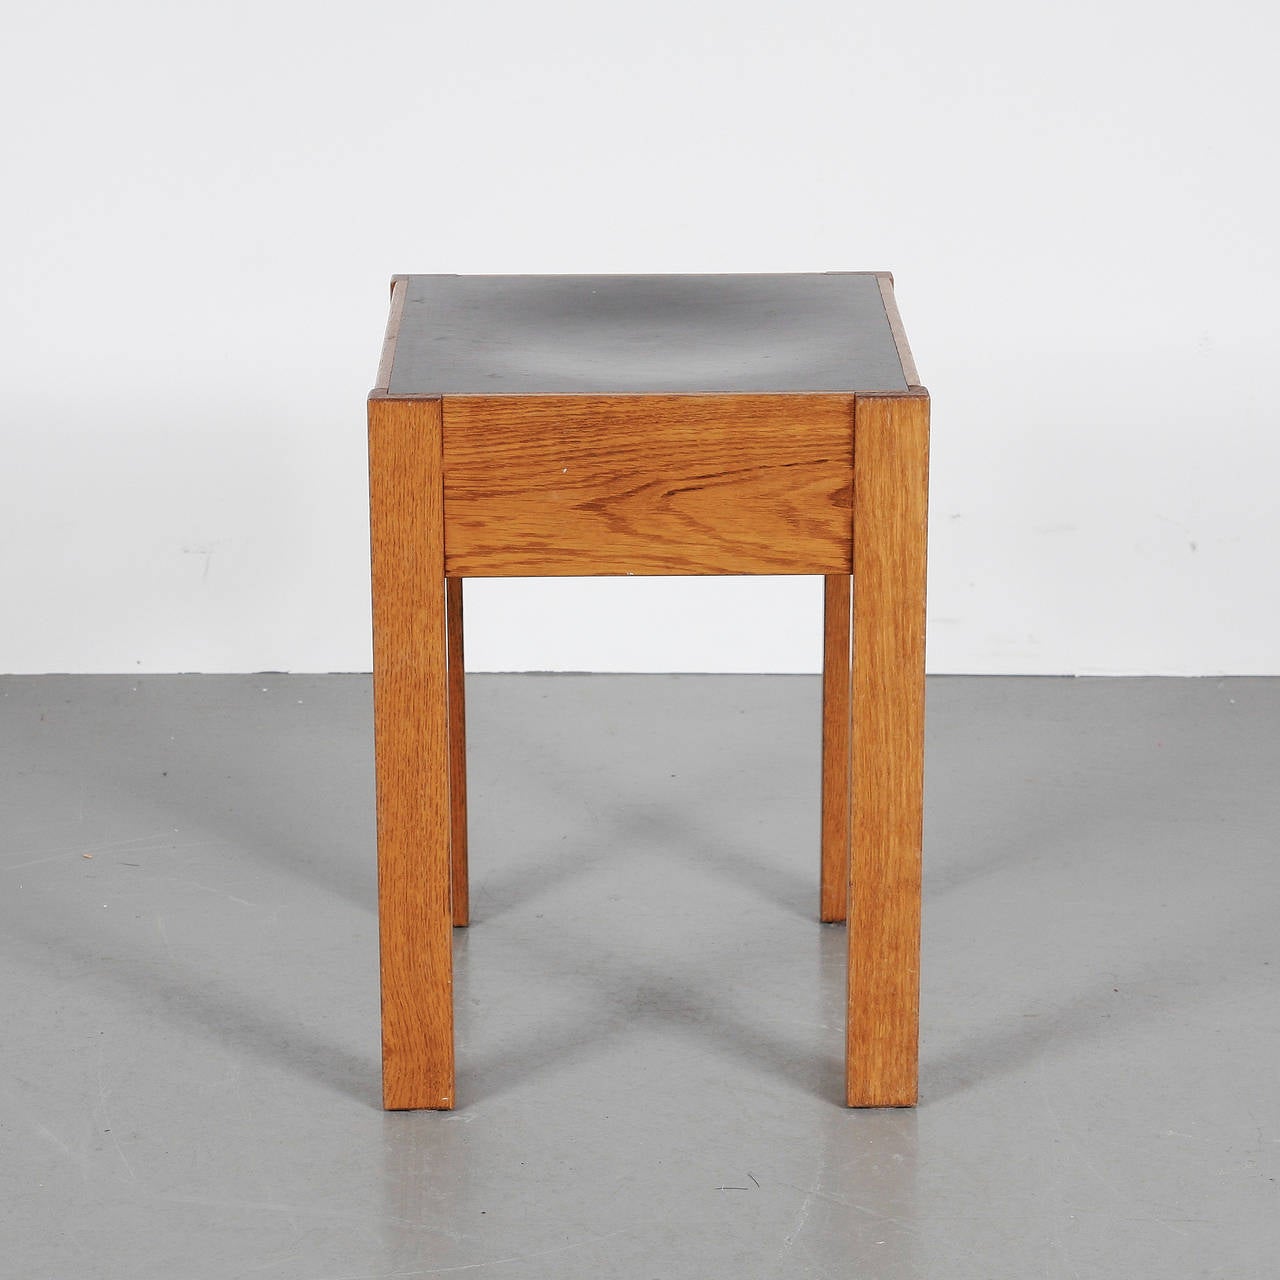 Stools designed by Hendrik Petrus Berlage for Gemeentenmuseum Den Haag, manufactured in  Netherlands, circa 1960

In good original condition, with minor wear consistent with age and use, preserving a beautiful patina.

Hendrik Petrus Berlage (